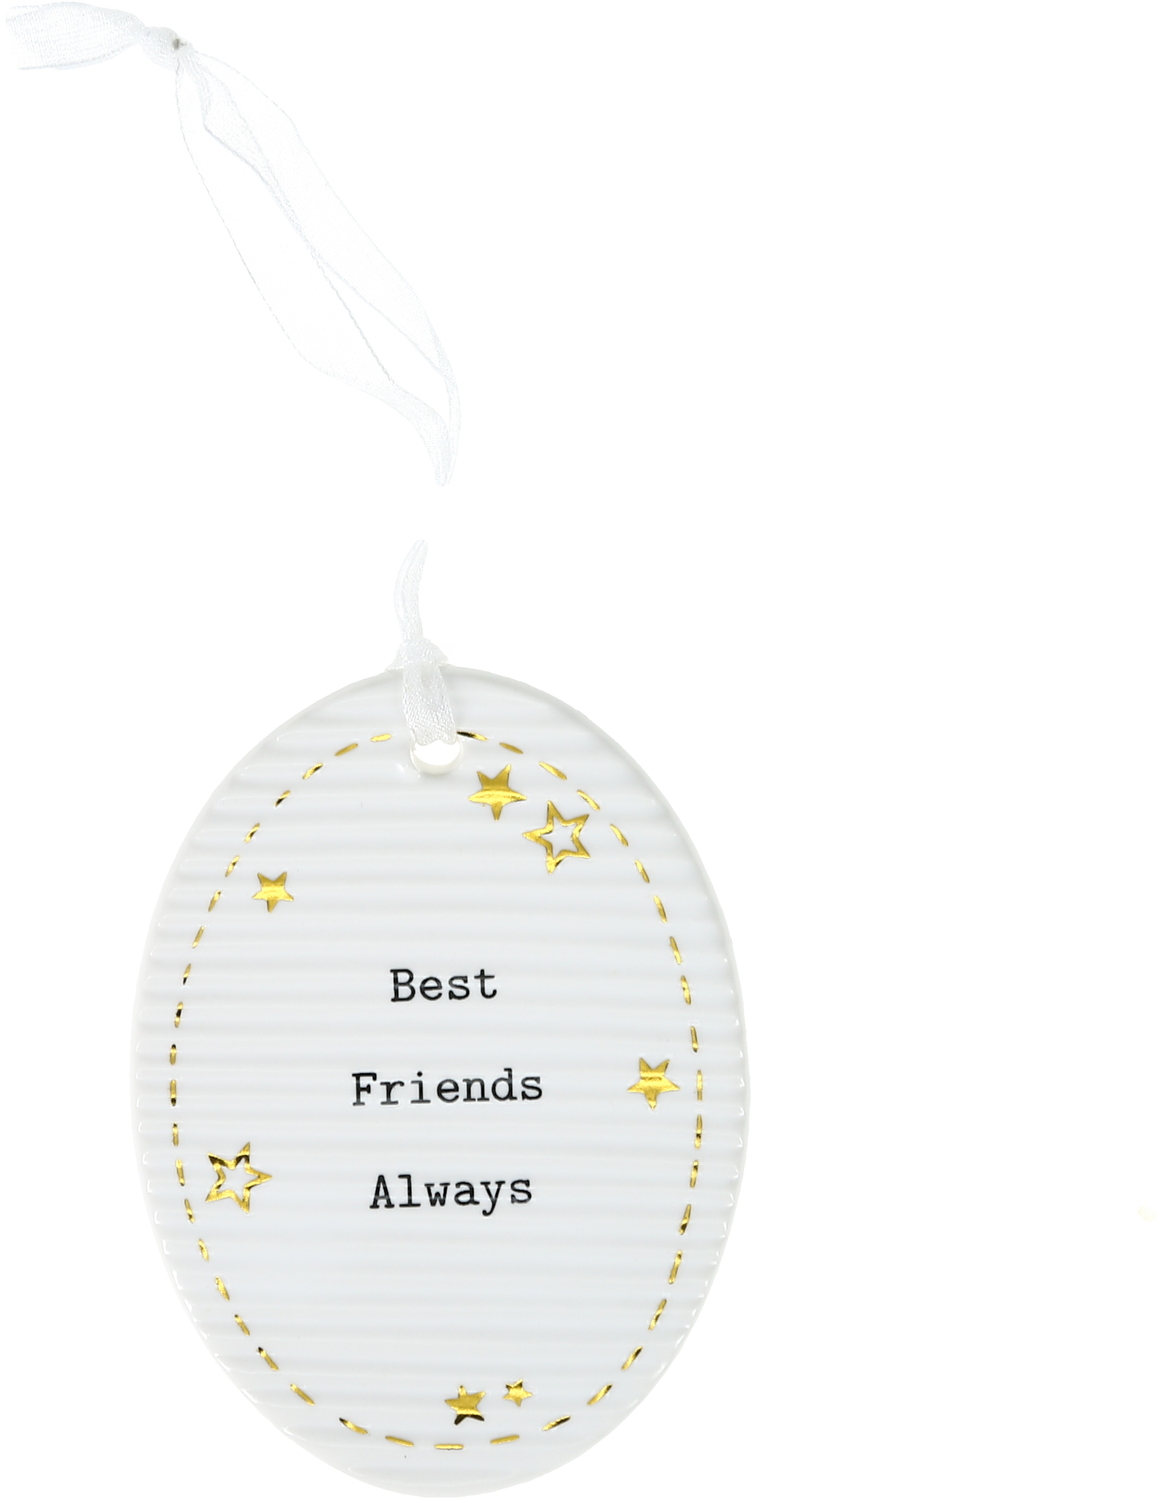 Best Friends by Thoughtful Words - Best Friends - 3.5" Hanging Oval Plaque